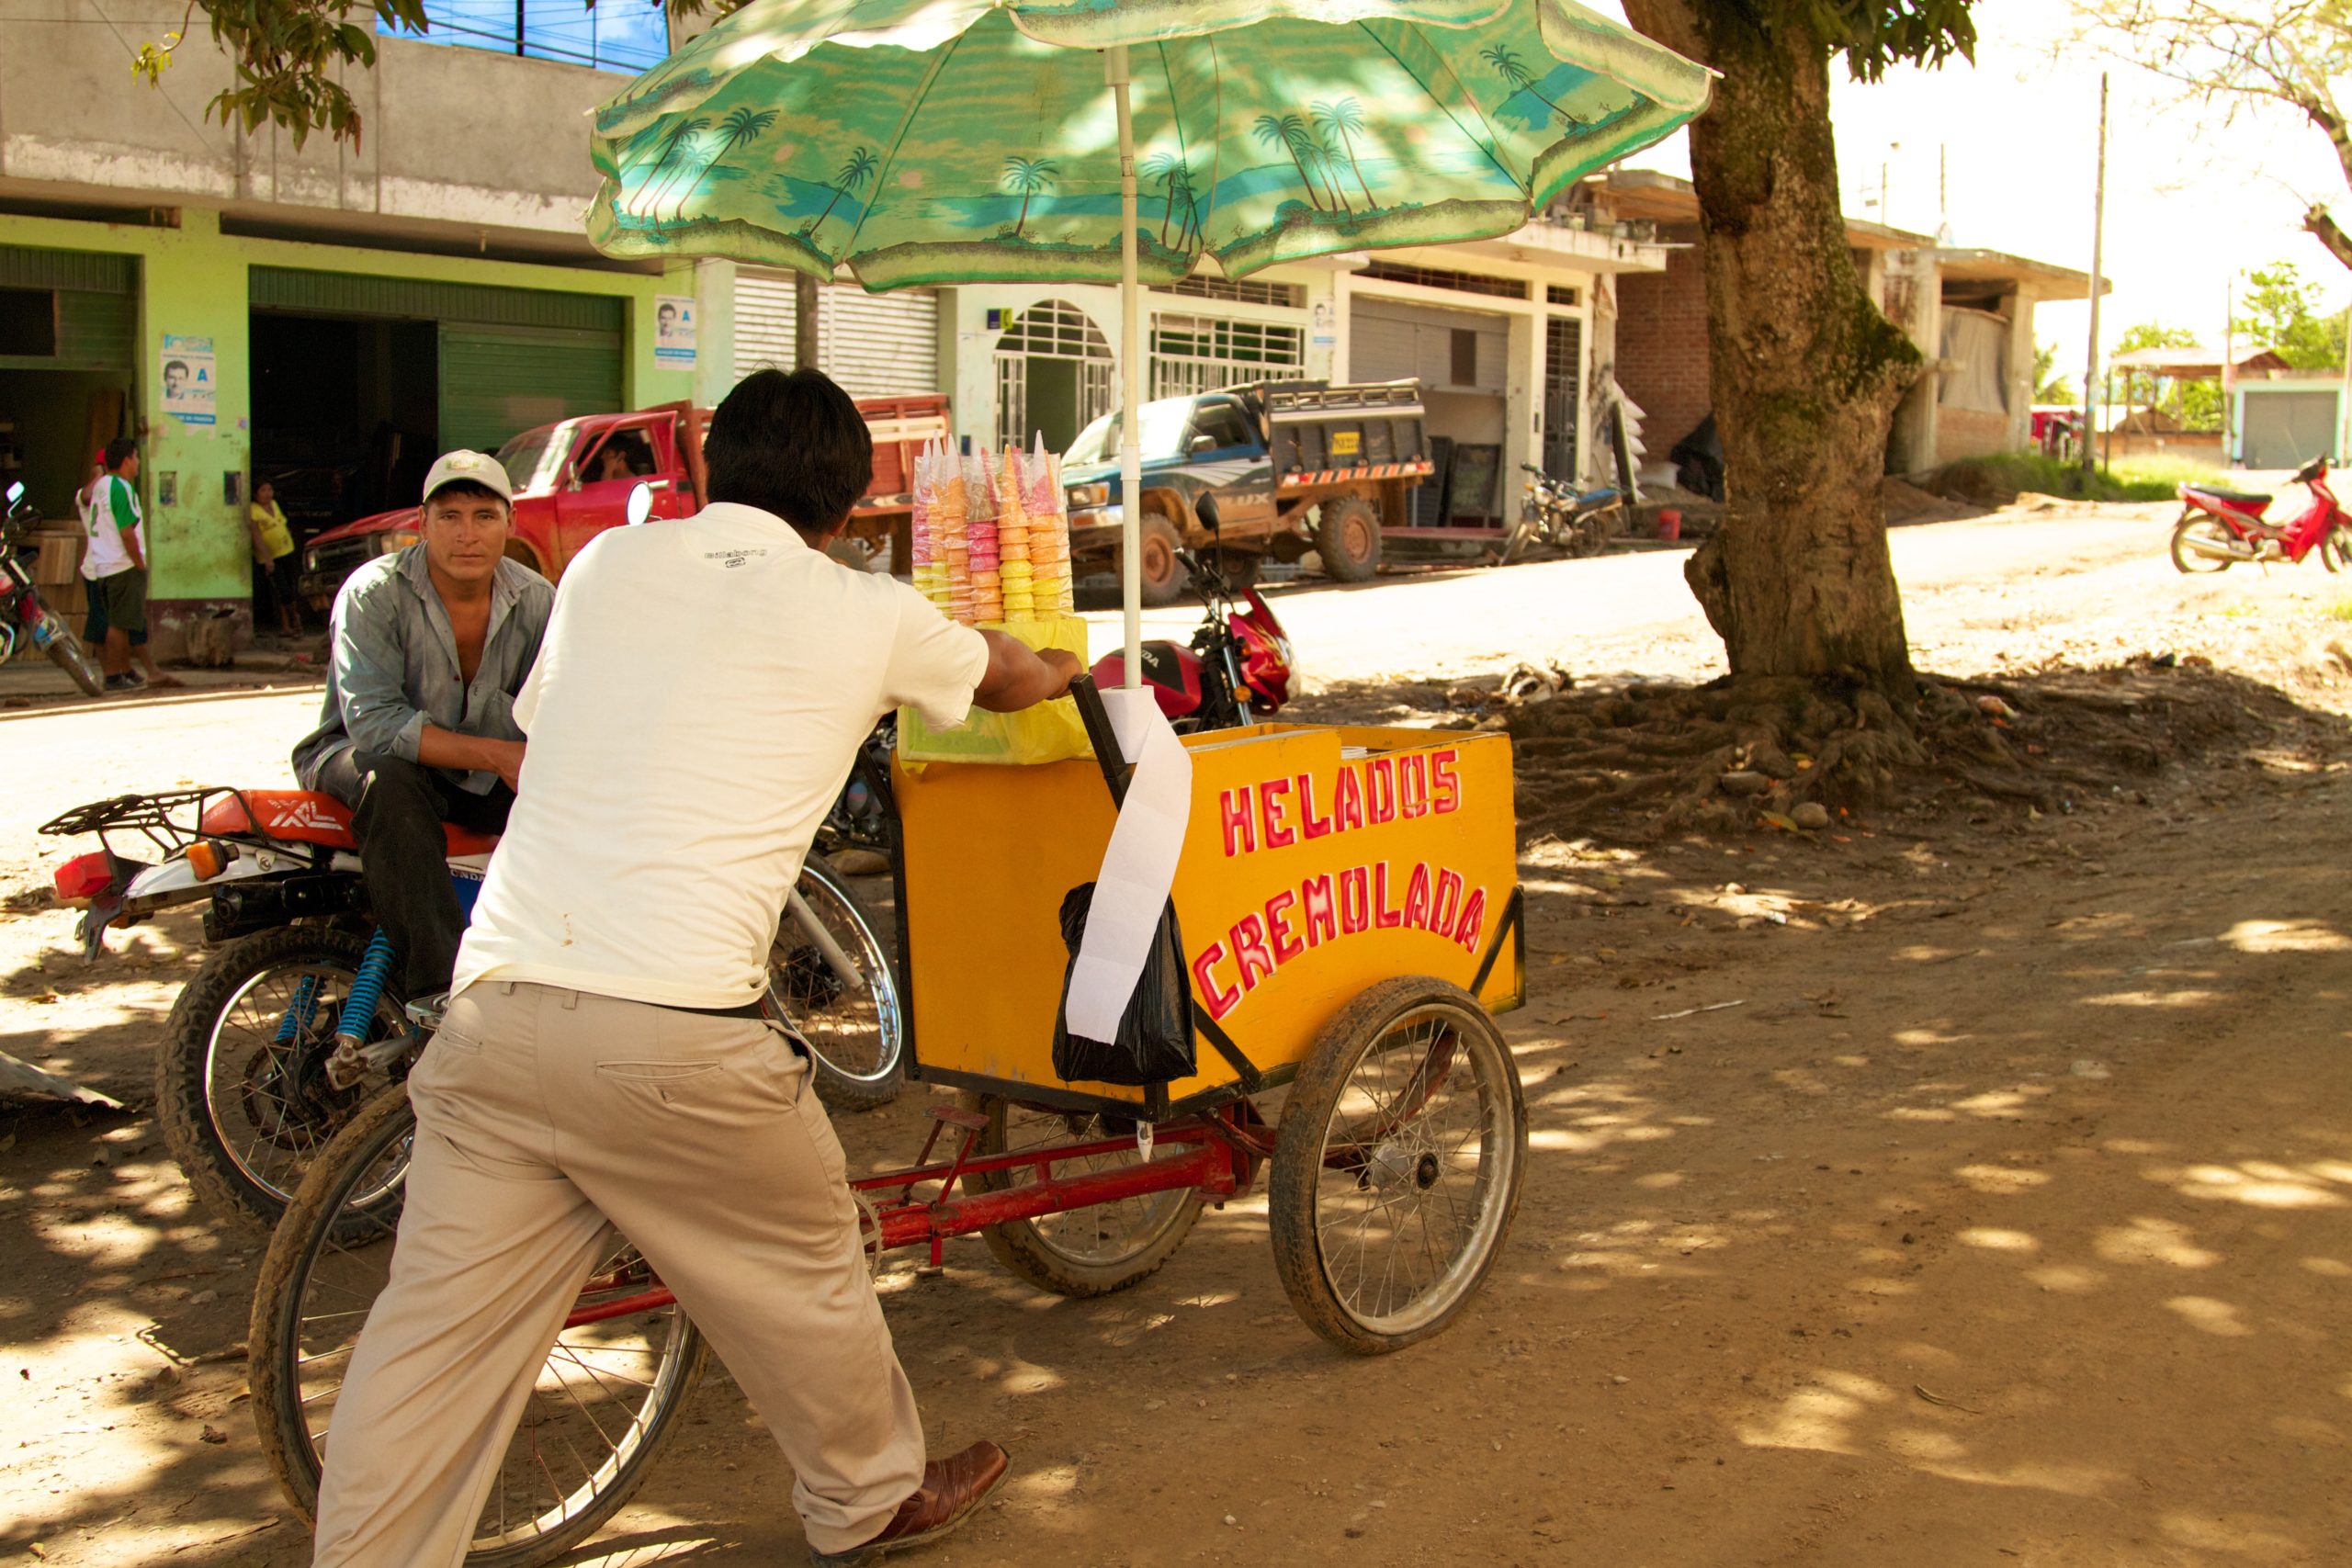 Selling ice cream in the streets of San Martín